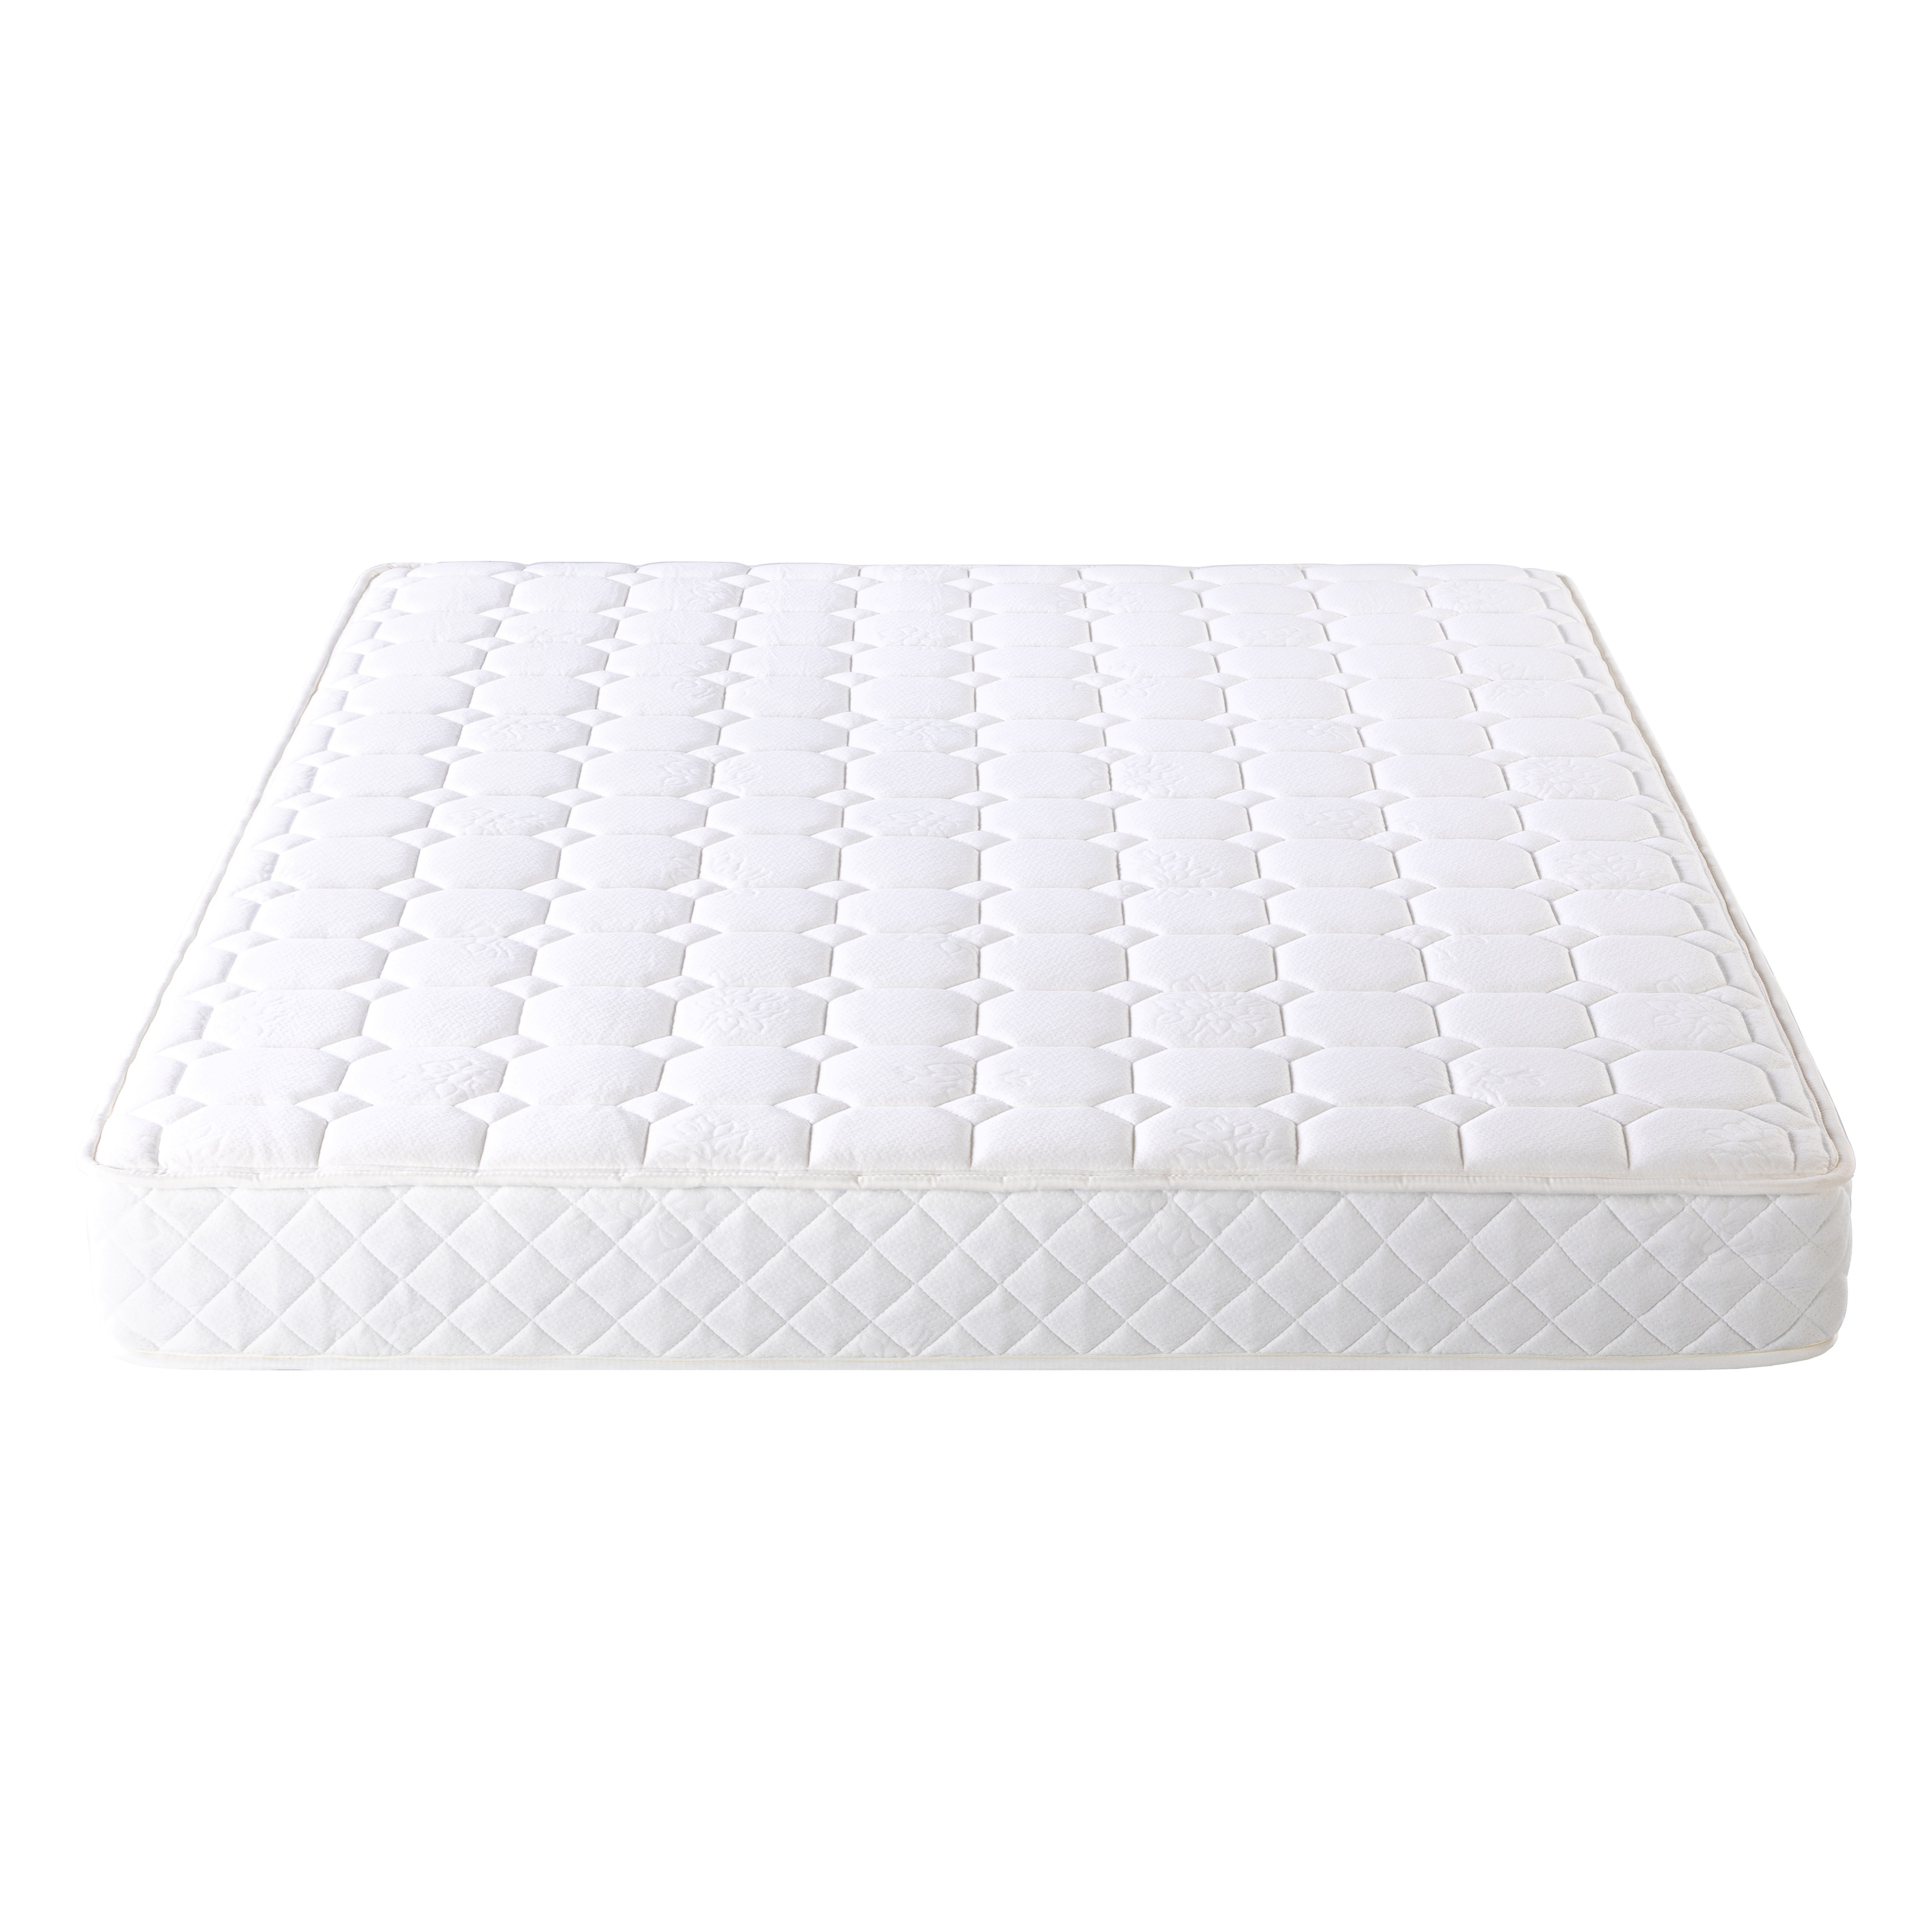 https://ak1.ostkcdn.com/images/products/is/images/direct/9e2e204ca9bacfc39b5e645c2a81fac97b45843d/Full-size-Pocketed-Coil-Spring-Mattress-8-inch---Crown-Comfort.jpg